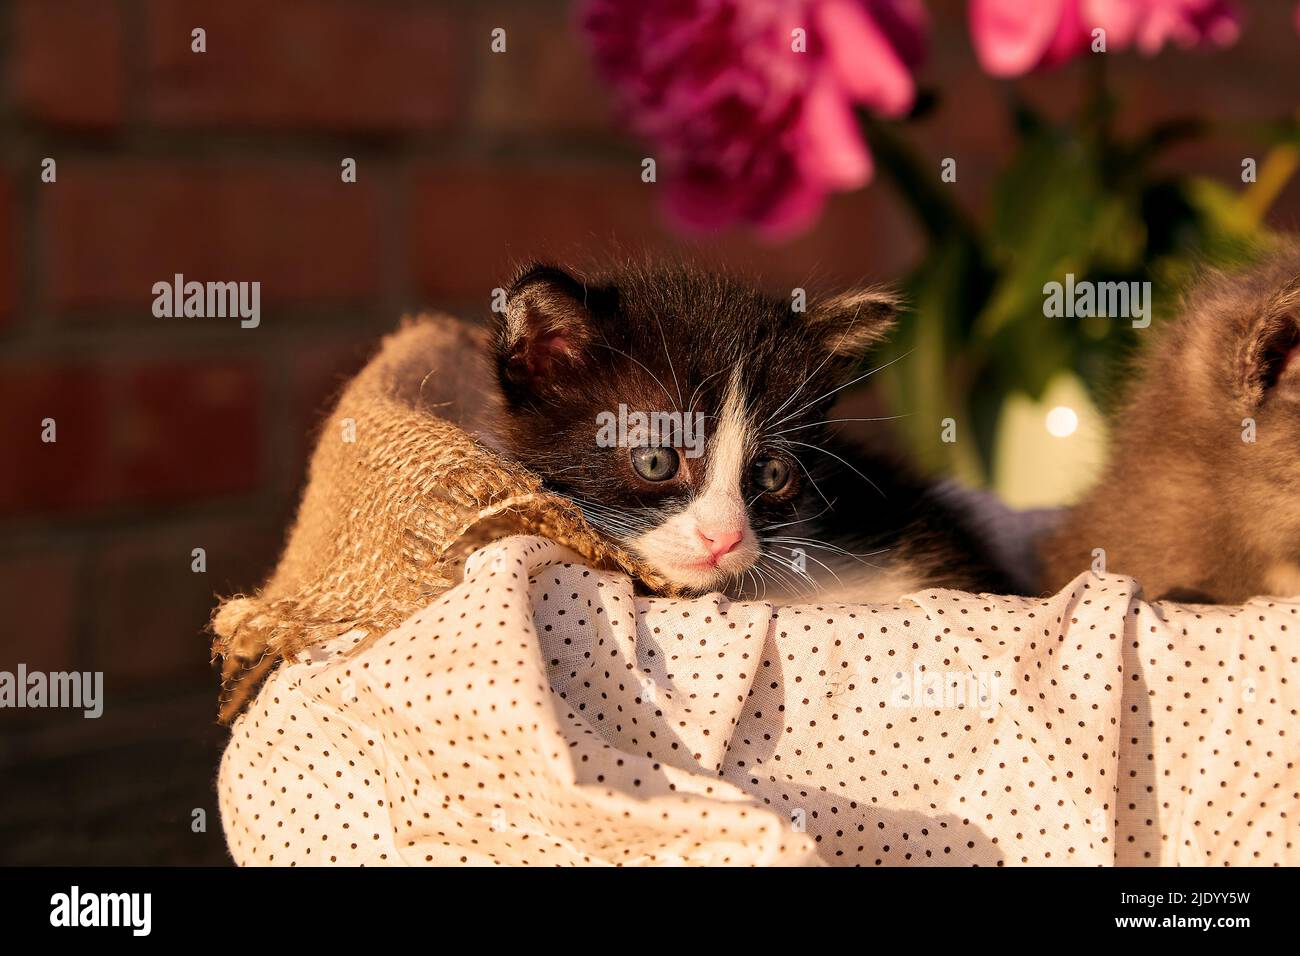 Cute animals - domestic kittens among blooming peony. Summer aesthetic background. Adorable small animal at summertime. Discovery and curiosity childhood. Stock Photo